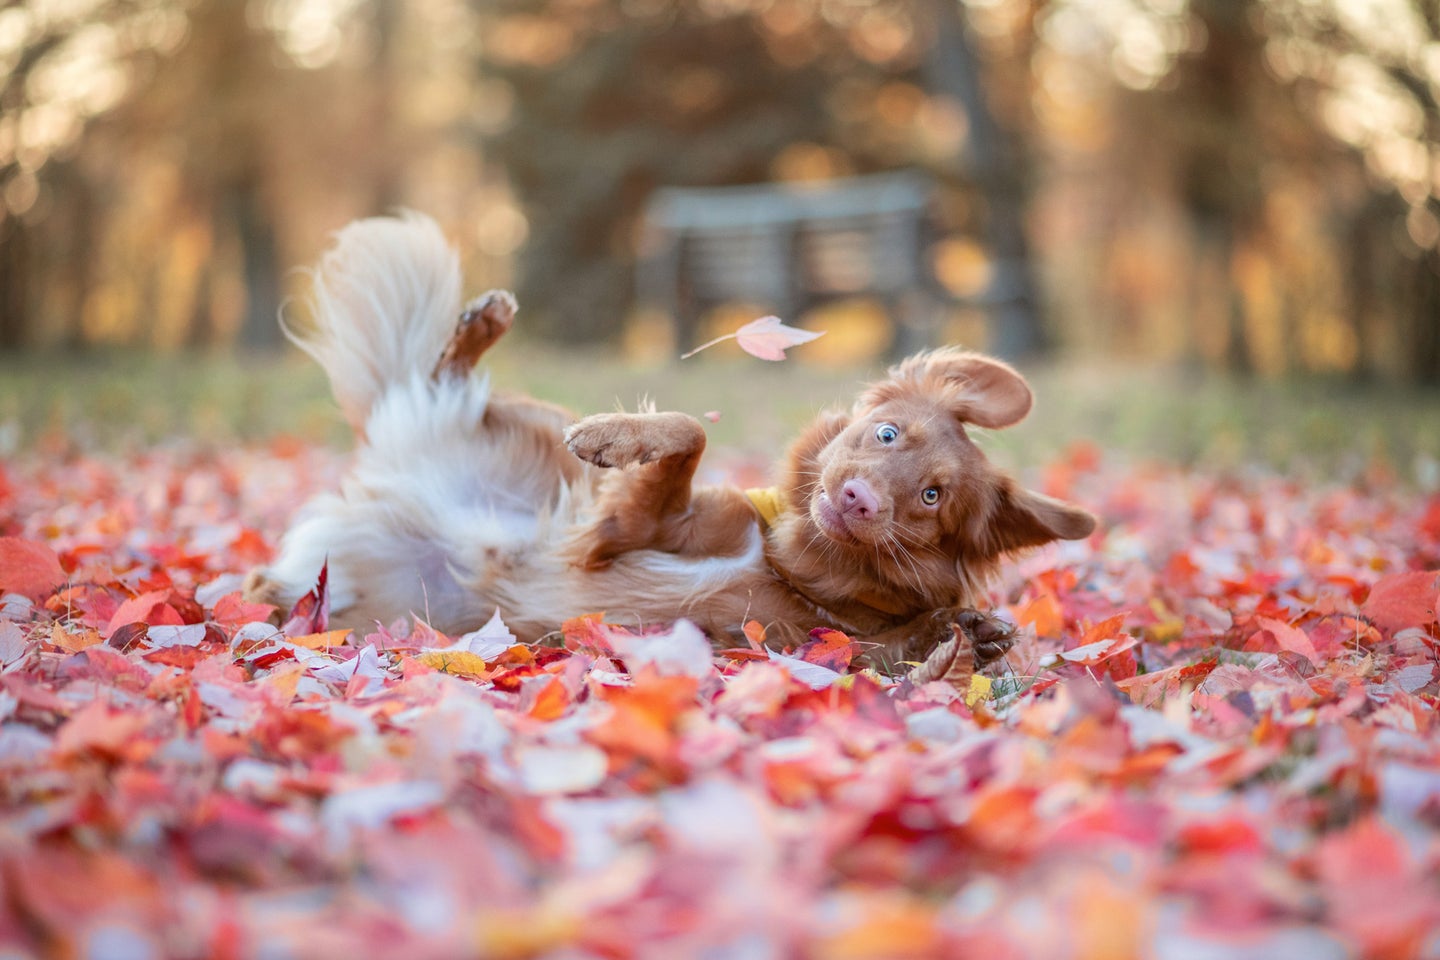 A dog falls in a pile of leaves with a goofy expression on its face.